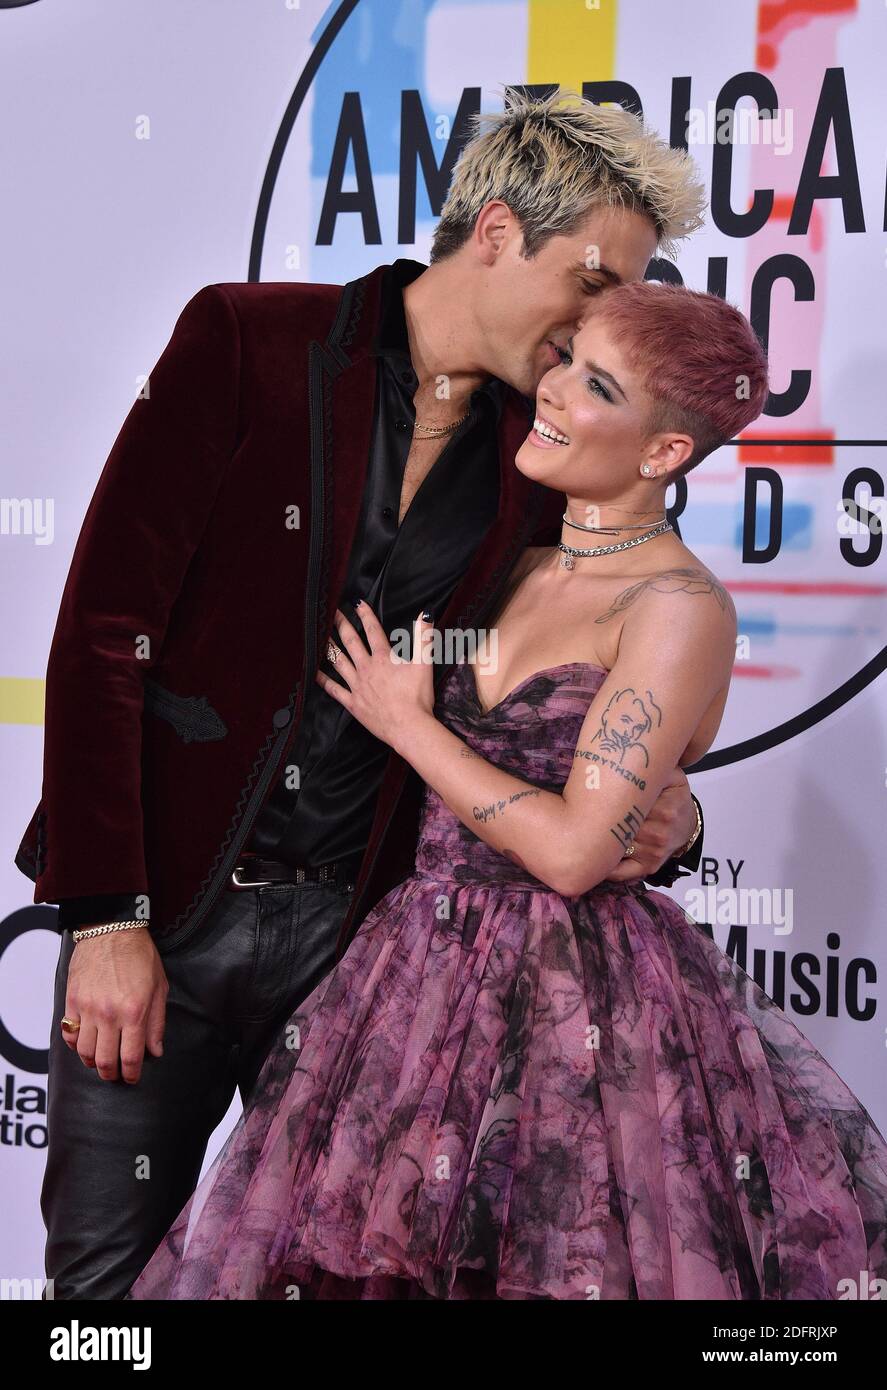 https://c8.alamy.com/comp/2DFRJXP/g-eazy-and-halsey-attend-the-2018-american-music-awards-at-microsoft-theater-on-october-9-2018-in-los-angeles-california-photo-by-lionel-hahnabacapresscom-2DFRJXP.jpg